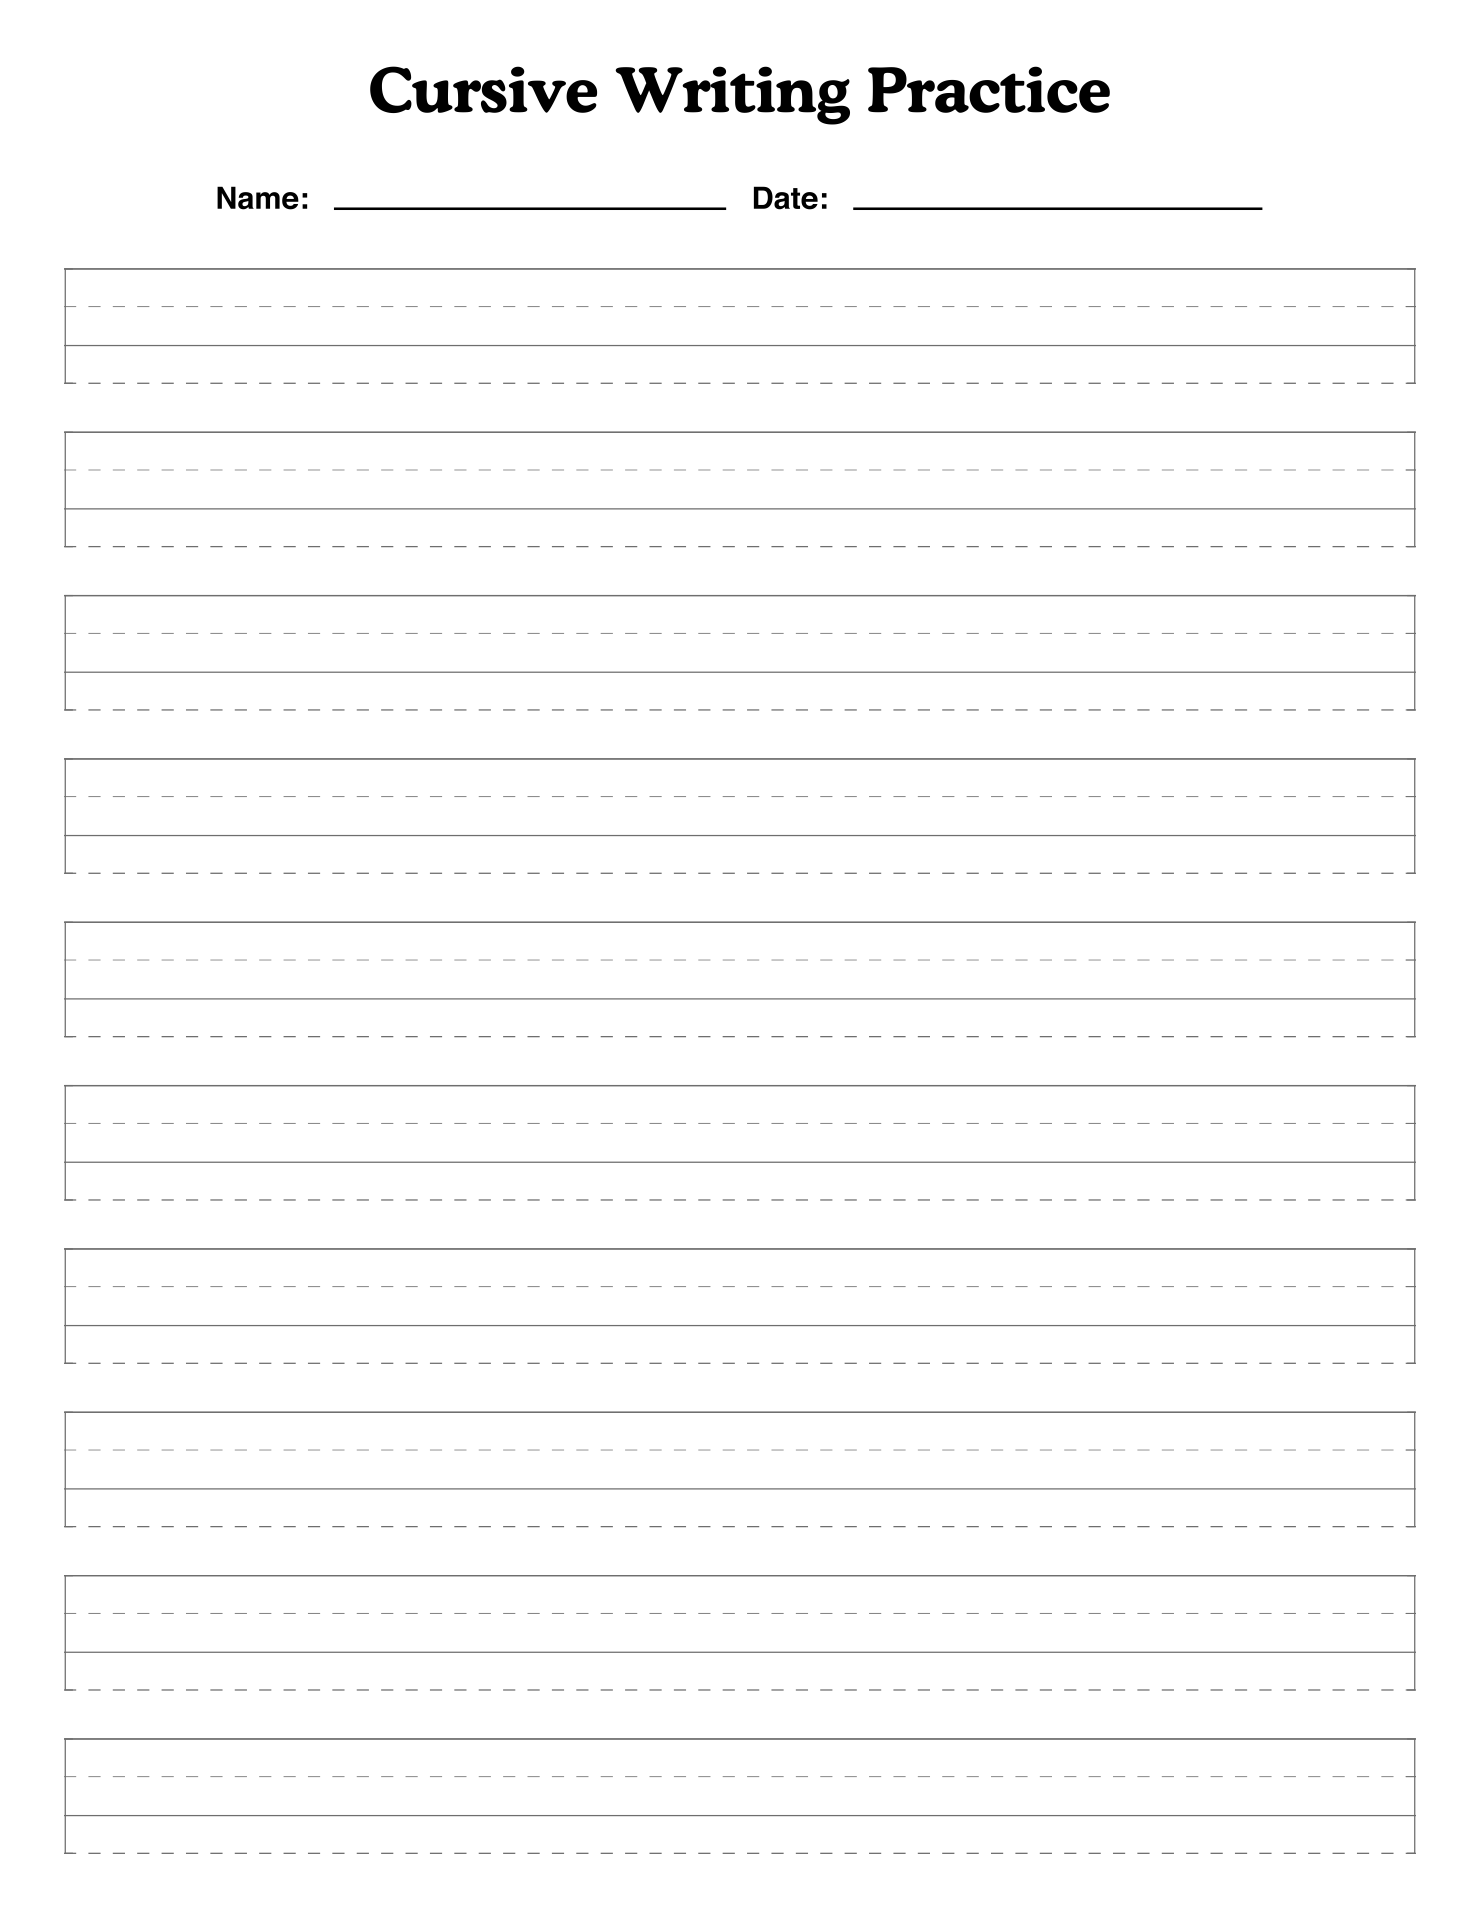 printable-cursive-writing-practice-sheets-clearance-outlet-save-50-jlcatj-gob-mx